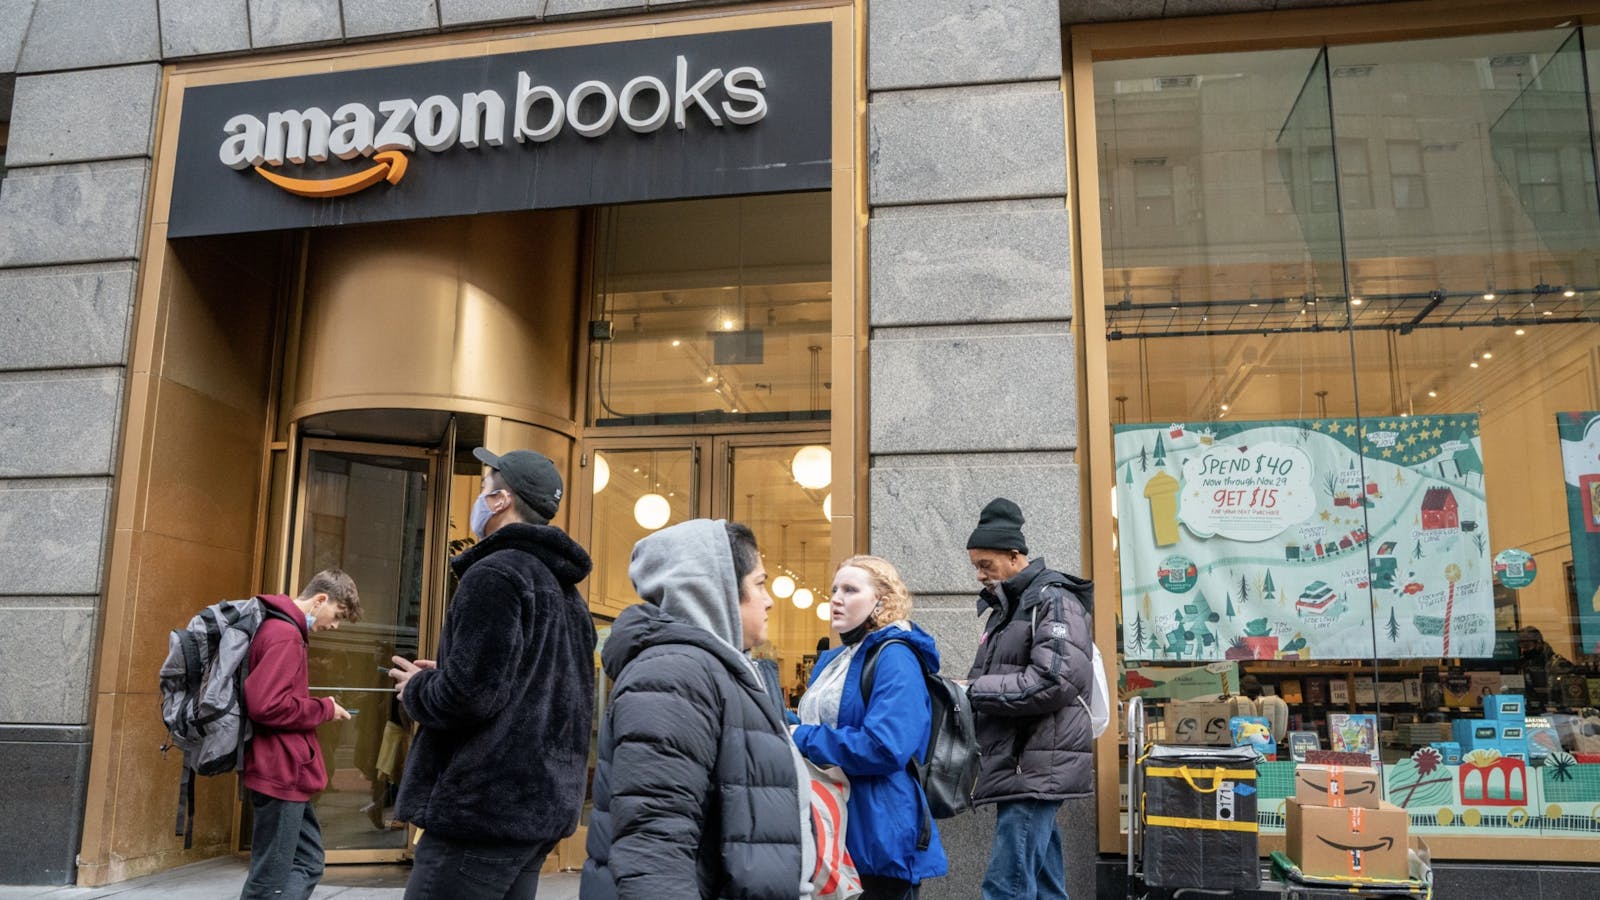 An Amazon Books store in New York. Photo by Bloomberg.